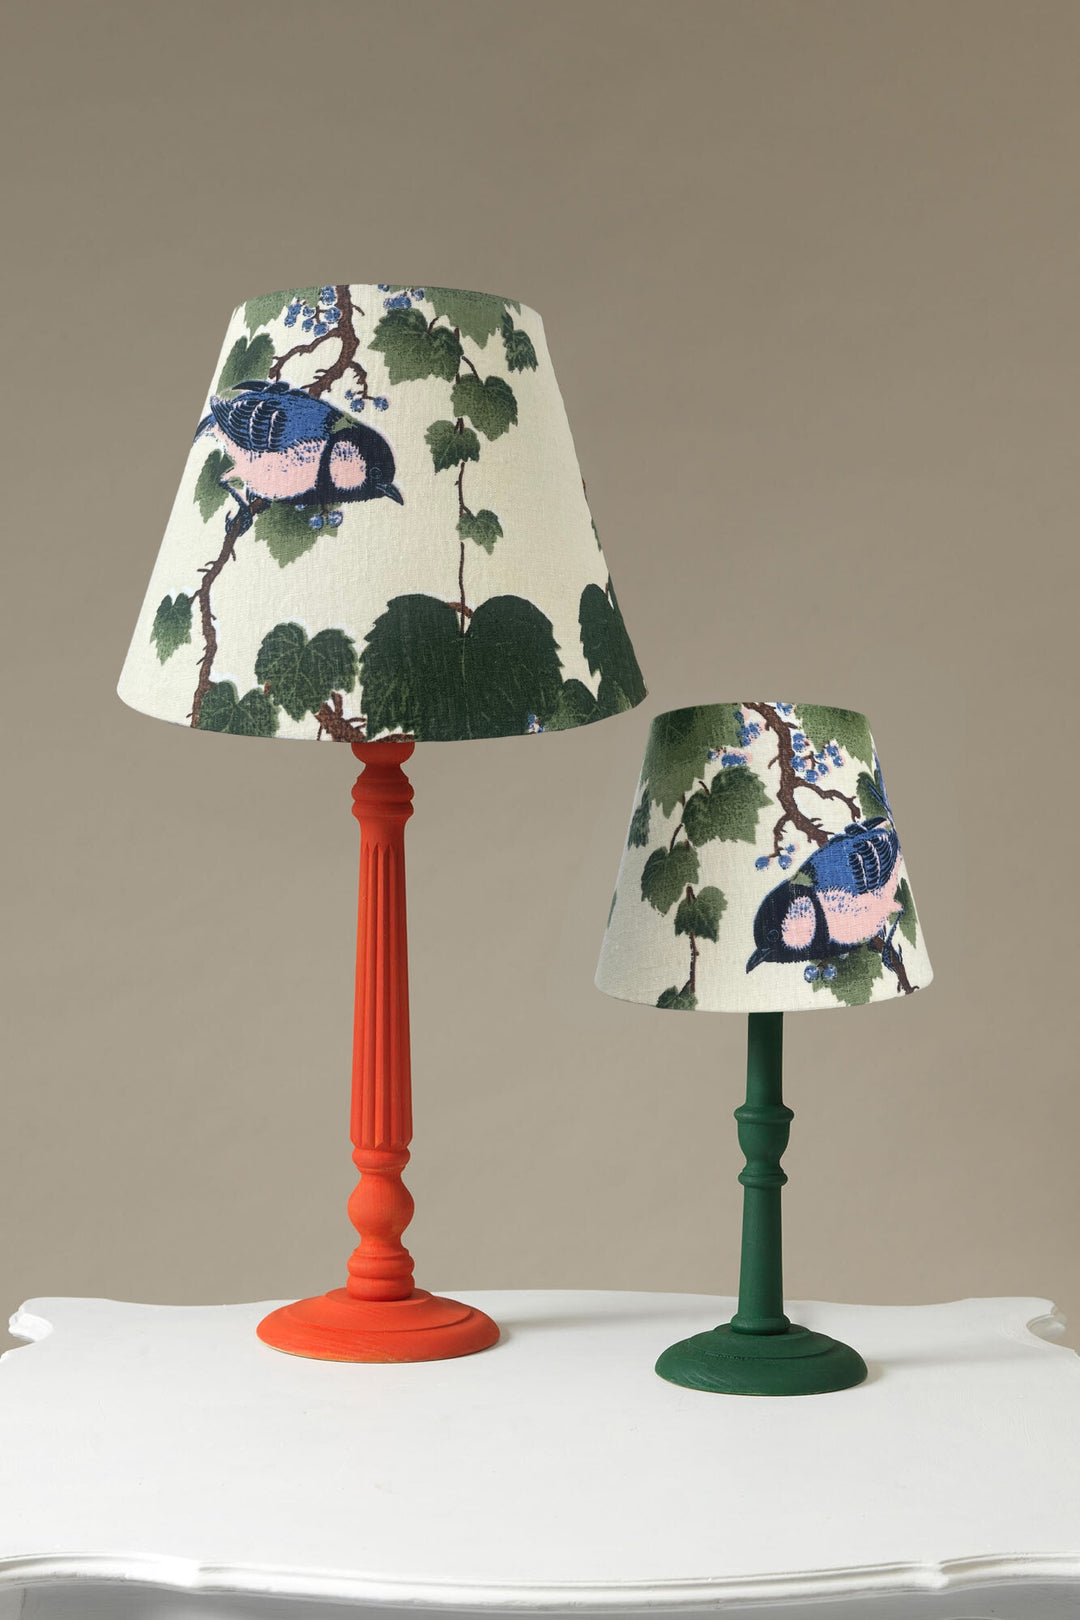 two sizes of autumn winter handmade lampshades with green maple leaf pattern on a cream background by One Hundred Stars